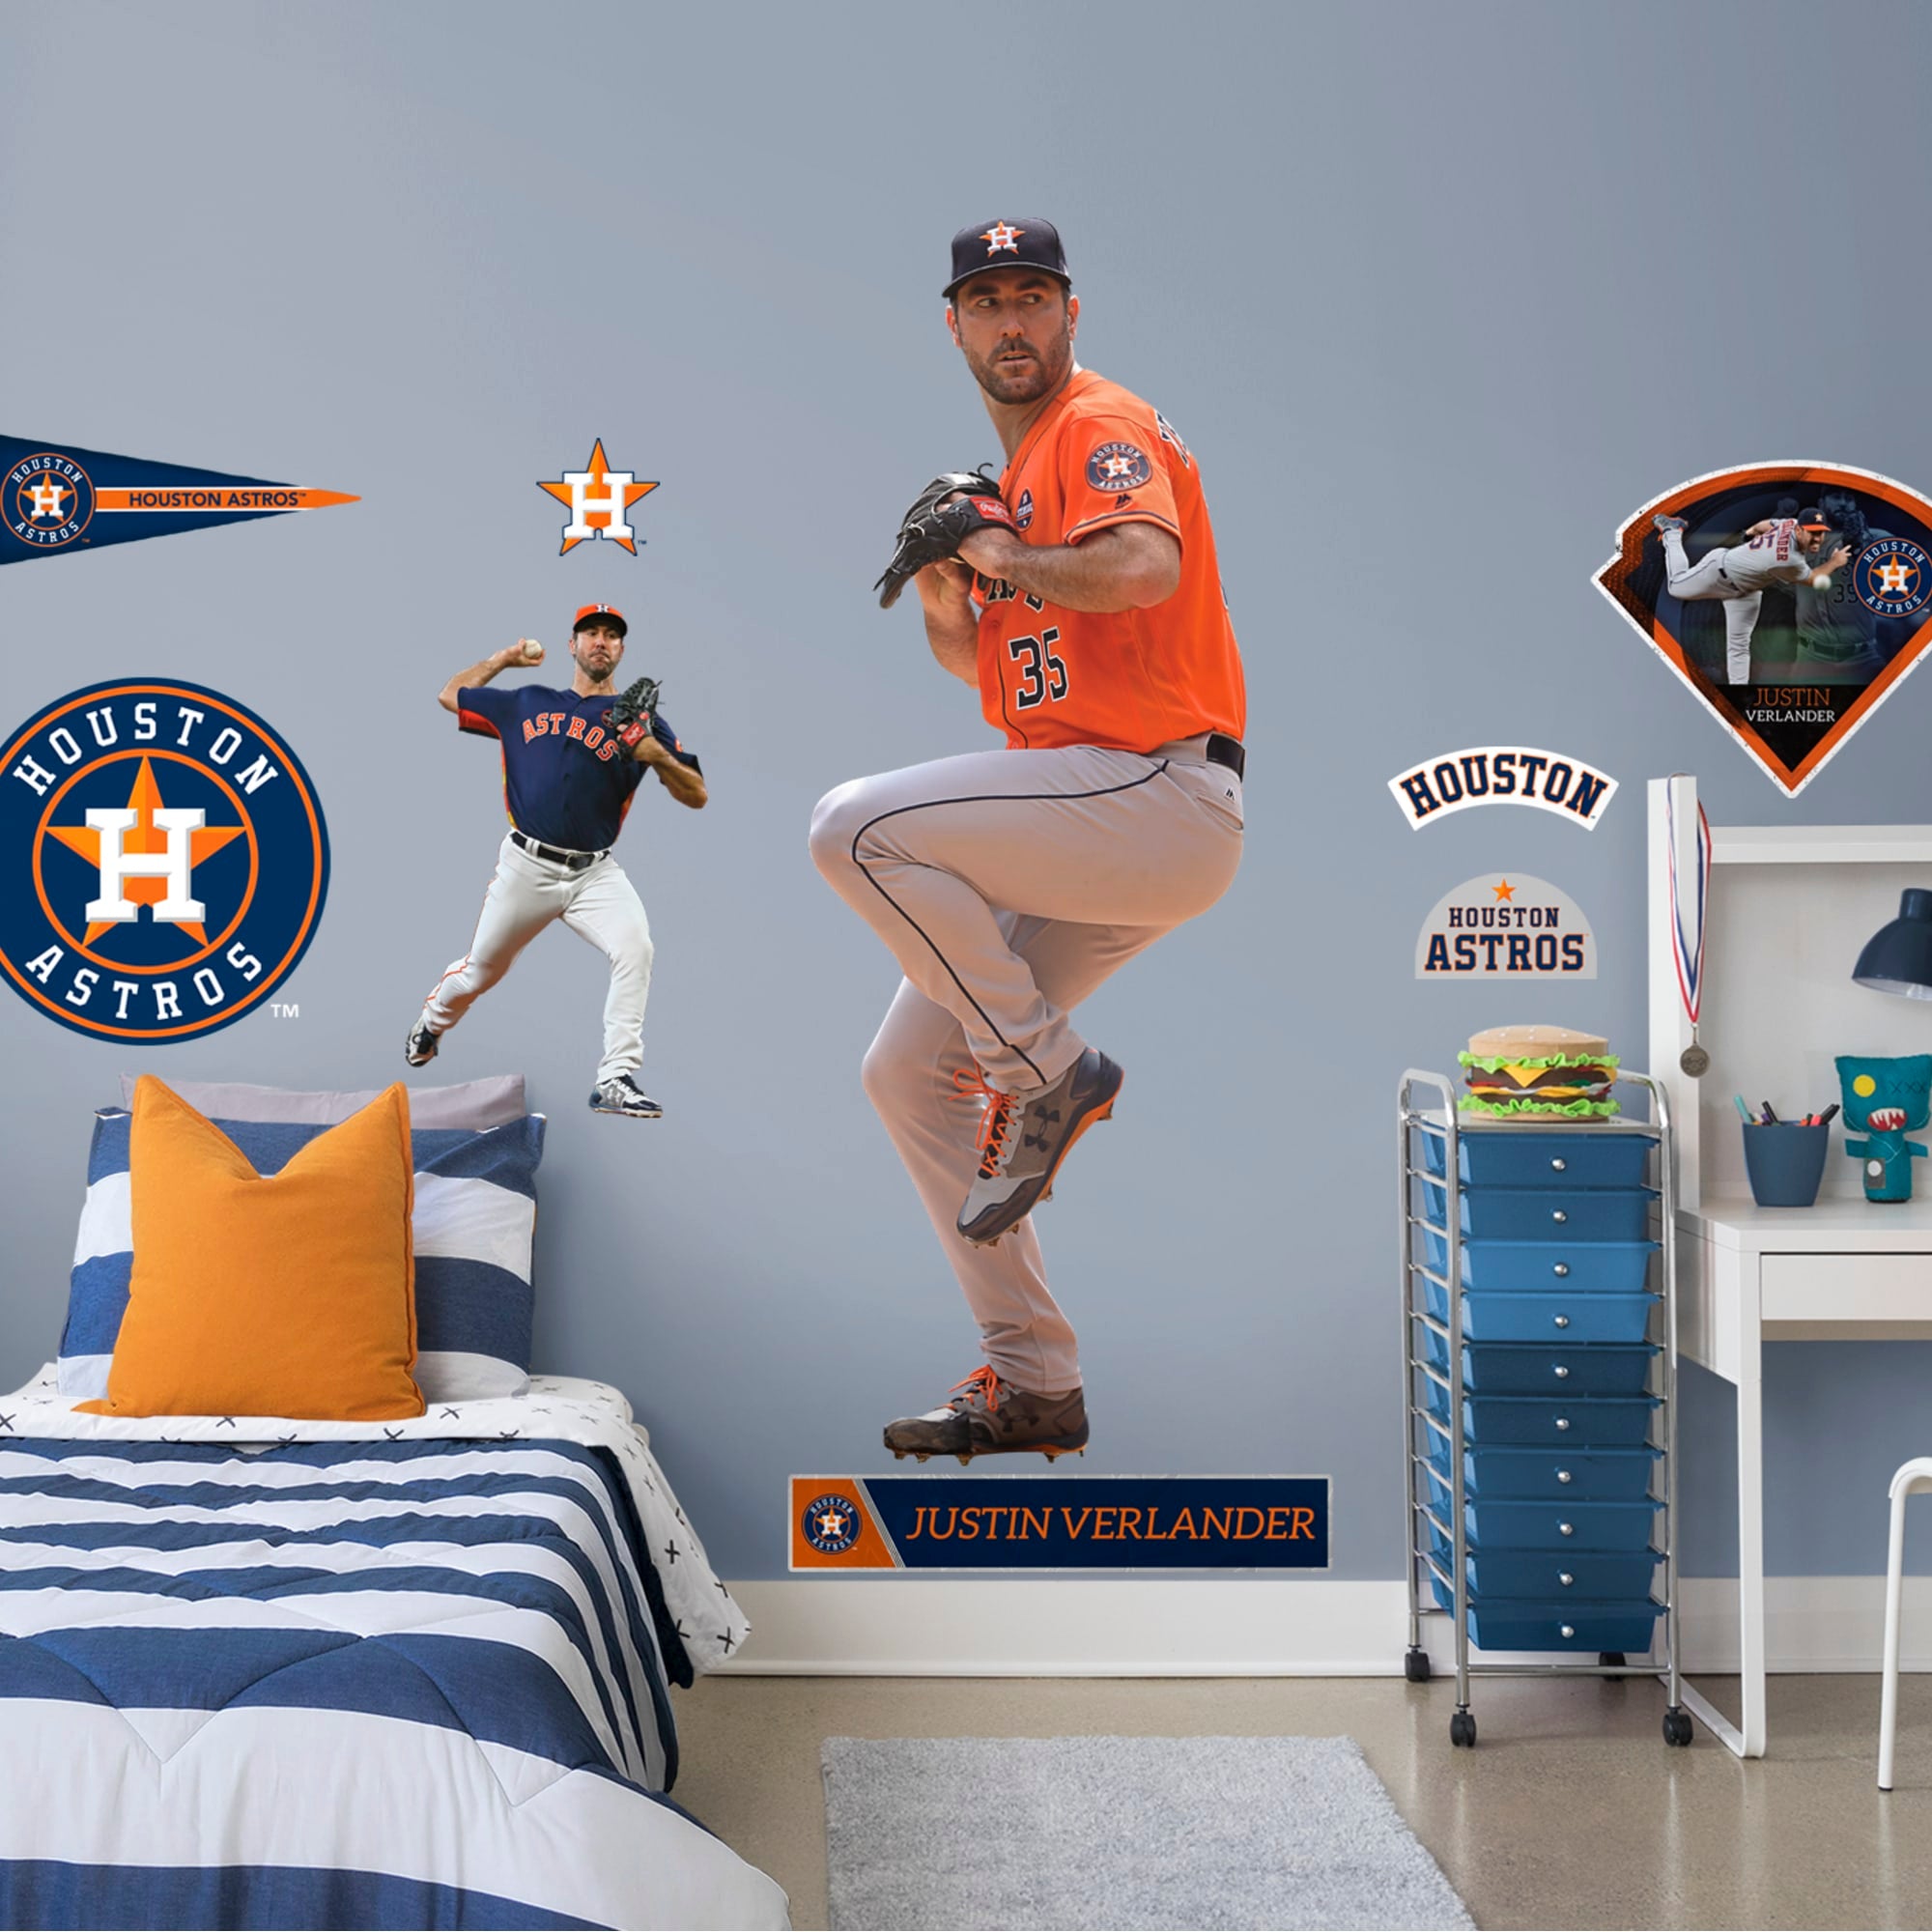 Justin Verlander for Houston Astros - Officially Licensed MLB Removable Wall Decal Life-Size Athlete + 11 Decals (27"W x 77"H) b